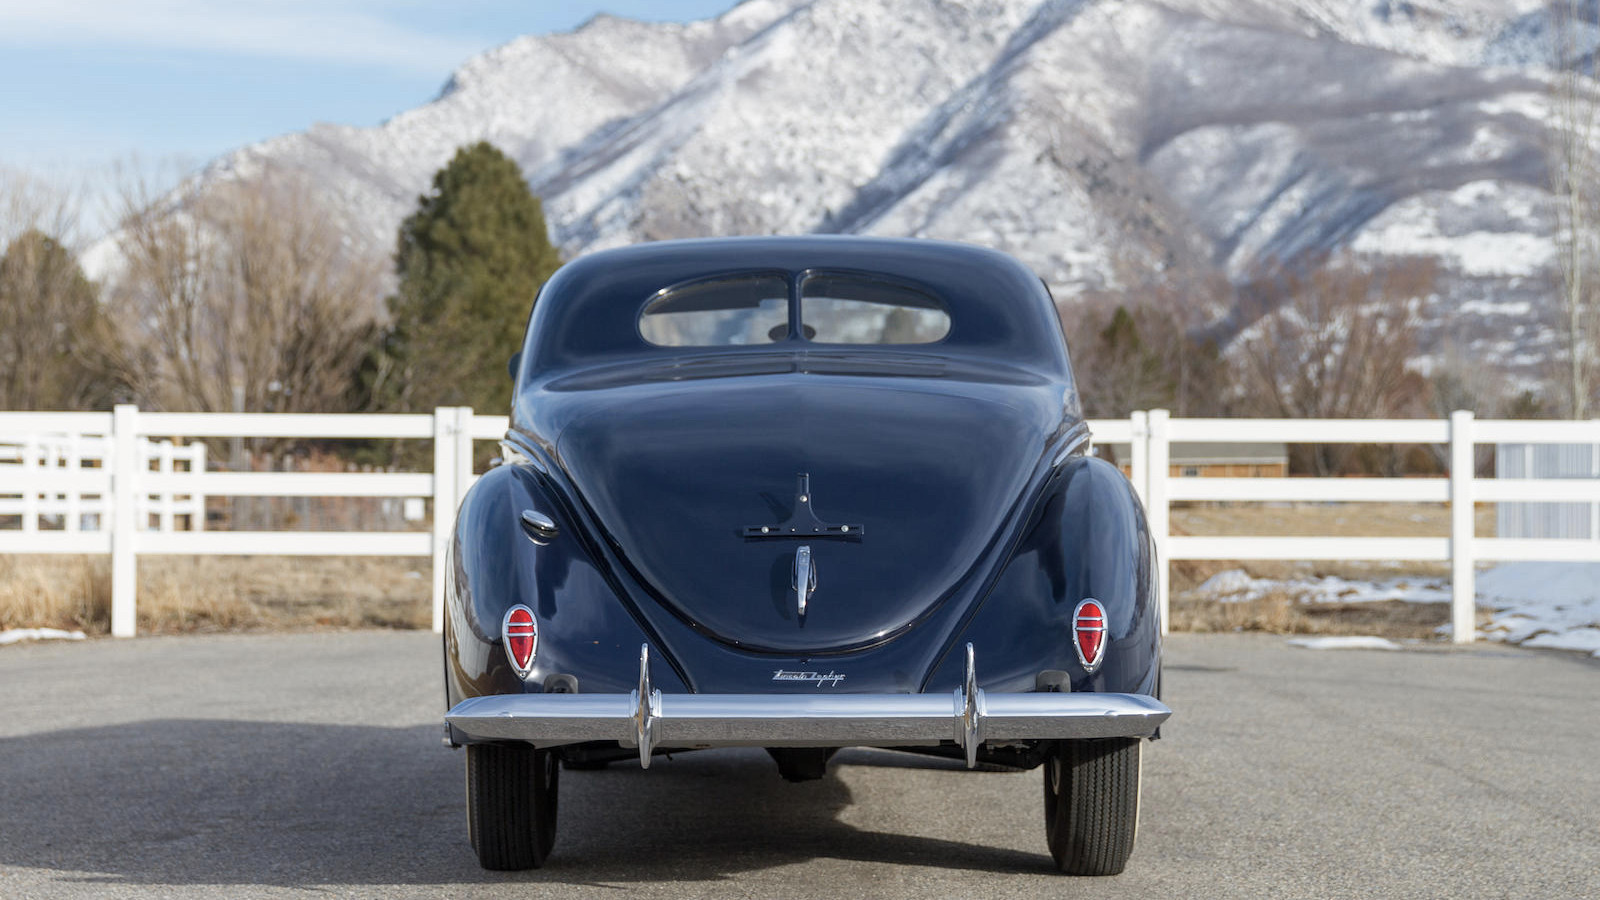 Trio of Lincoln Zephyrs set for auction at Amelia Island